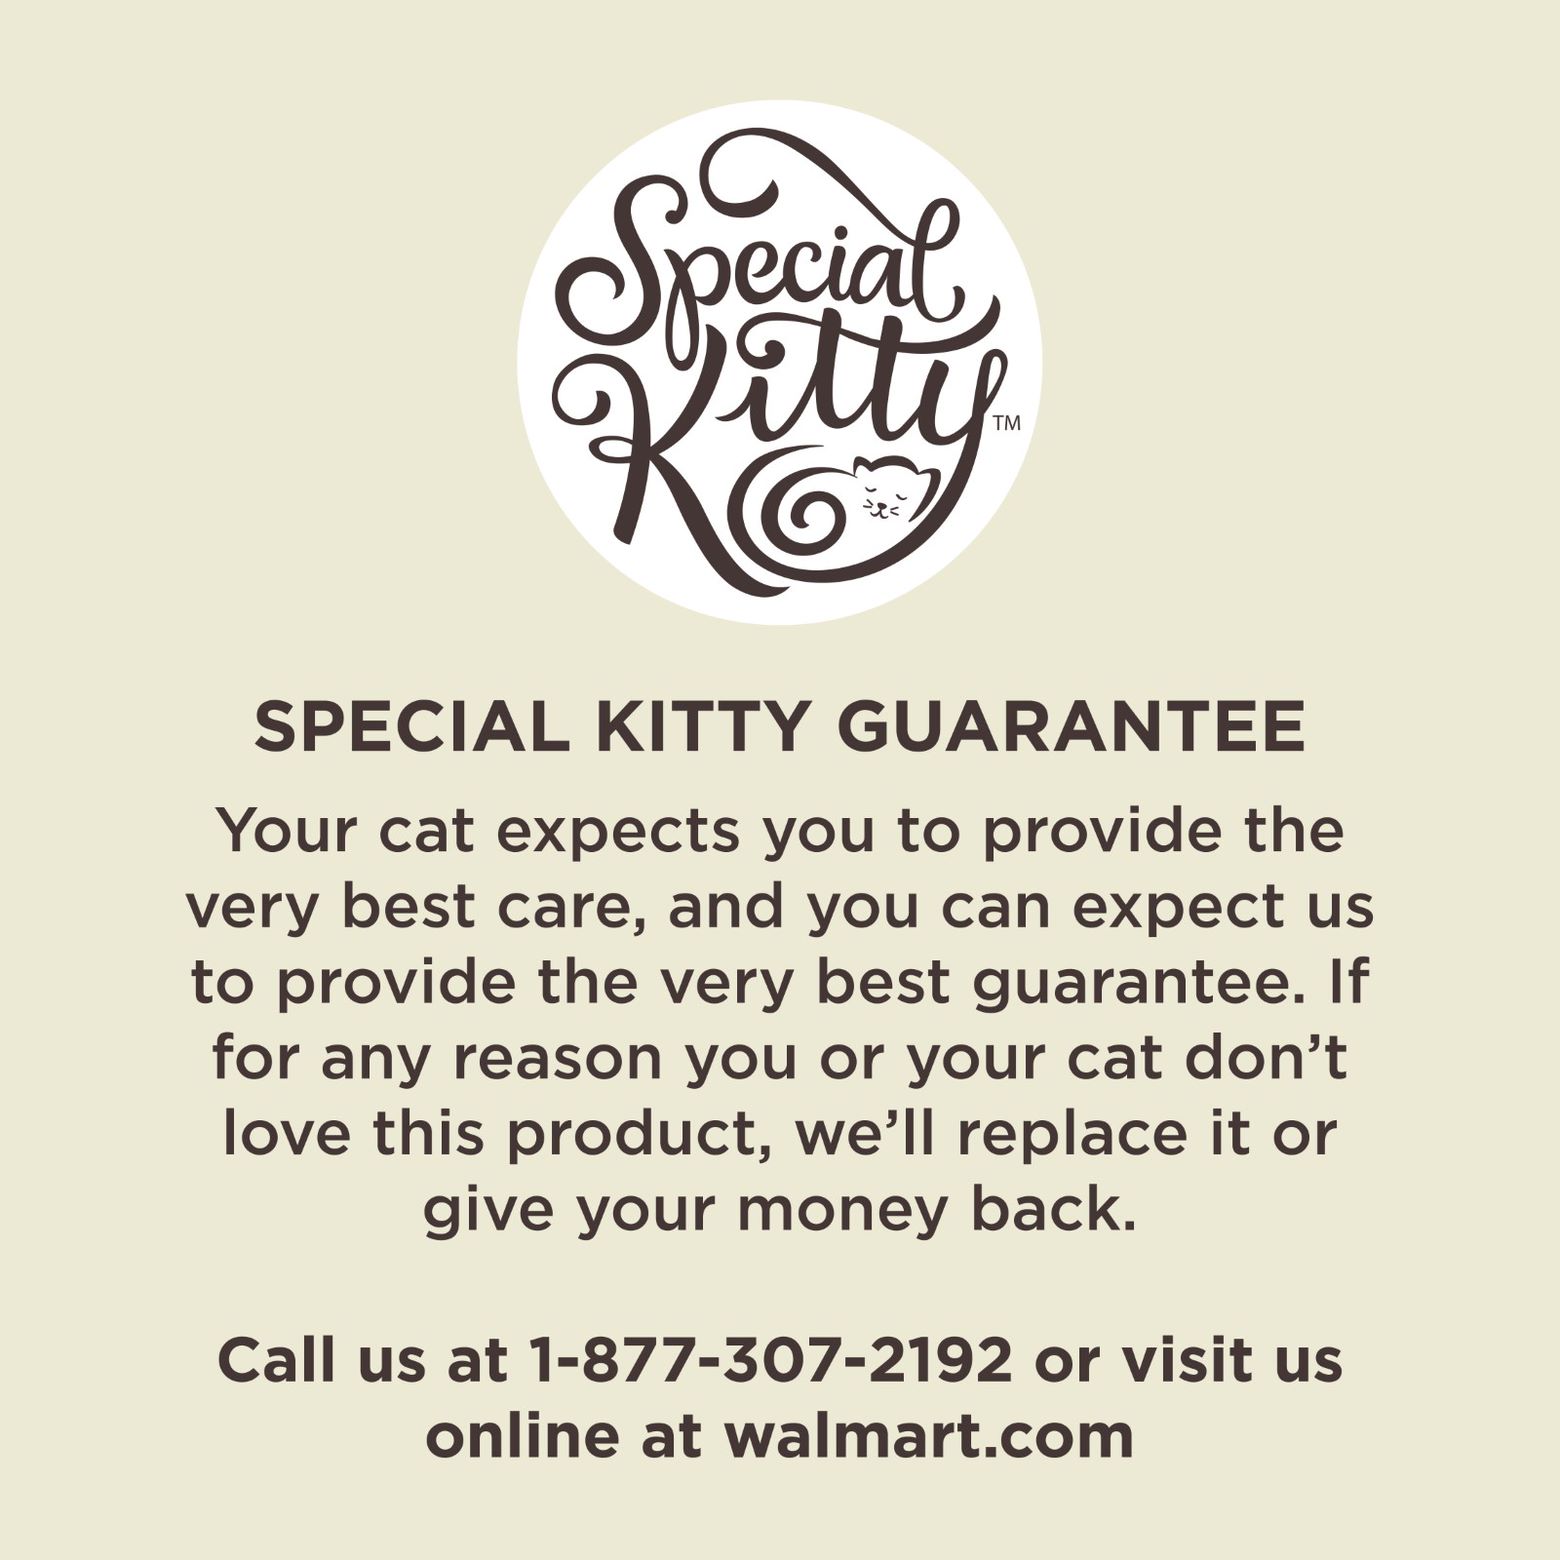 Special Kitty Lightweight & Scoopable Clumping Cat Litter, Fresh Scent, 8.5 lb - image 7 of 7